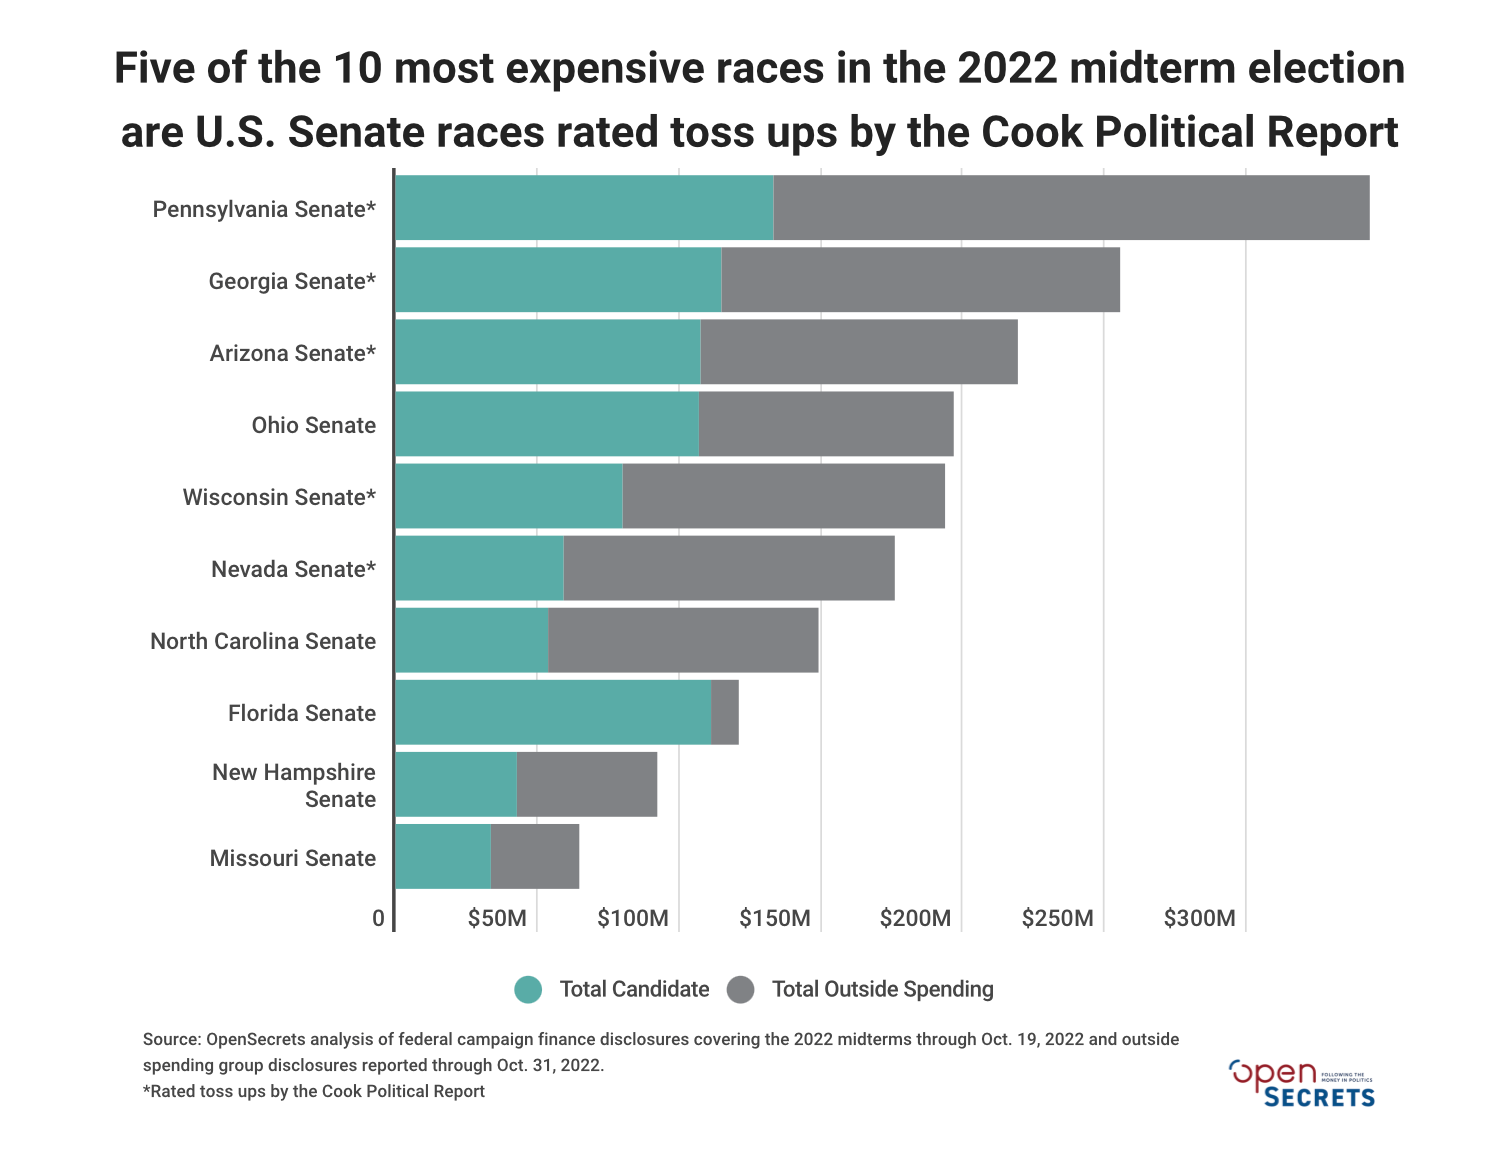 Tight Senate races in Pennsylvania, Georgia and Arizona are the most expensive races in the 2022 midterms